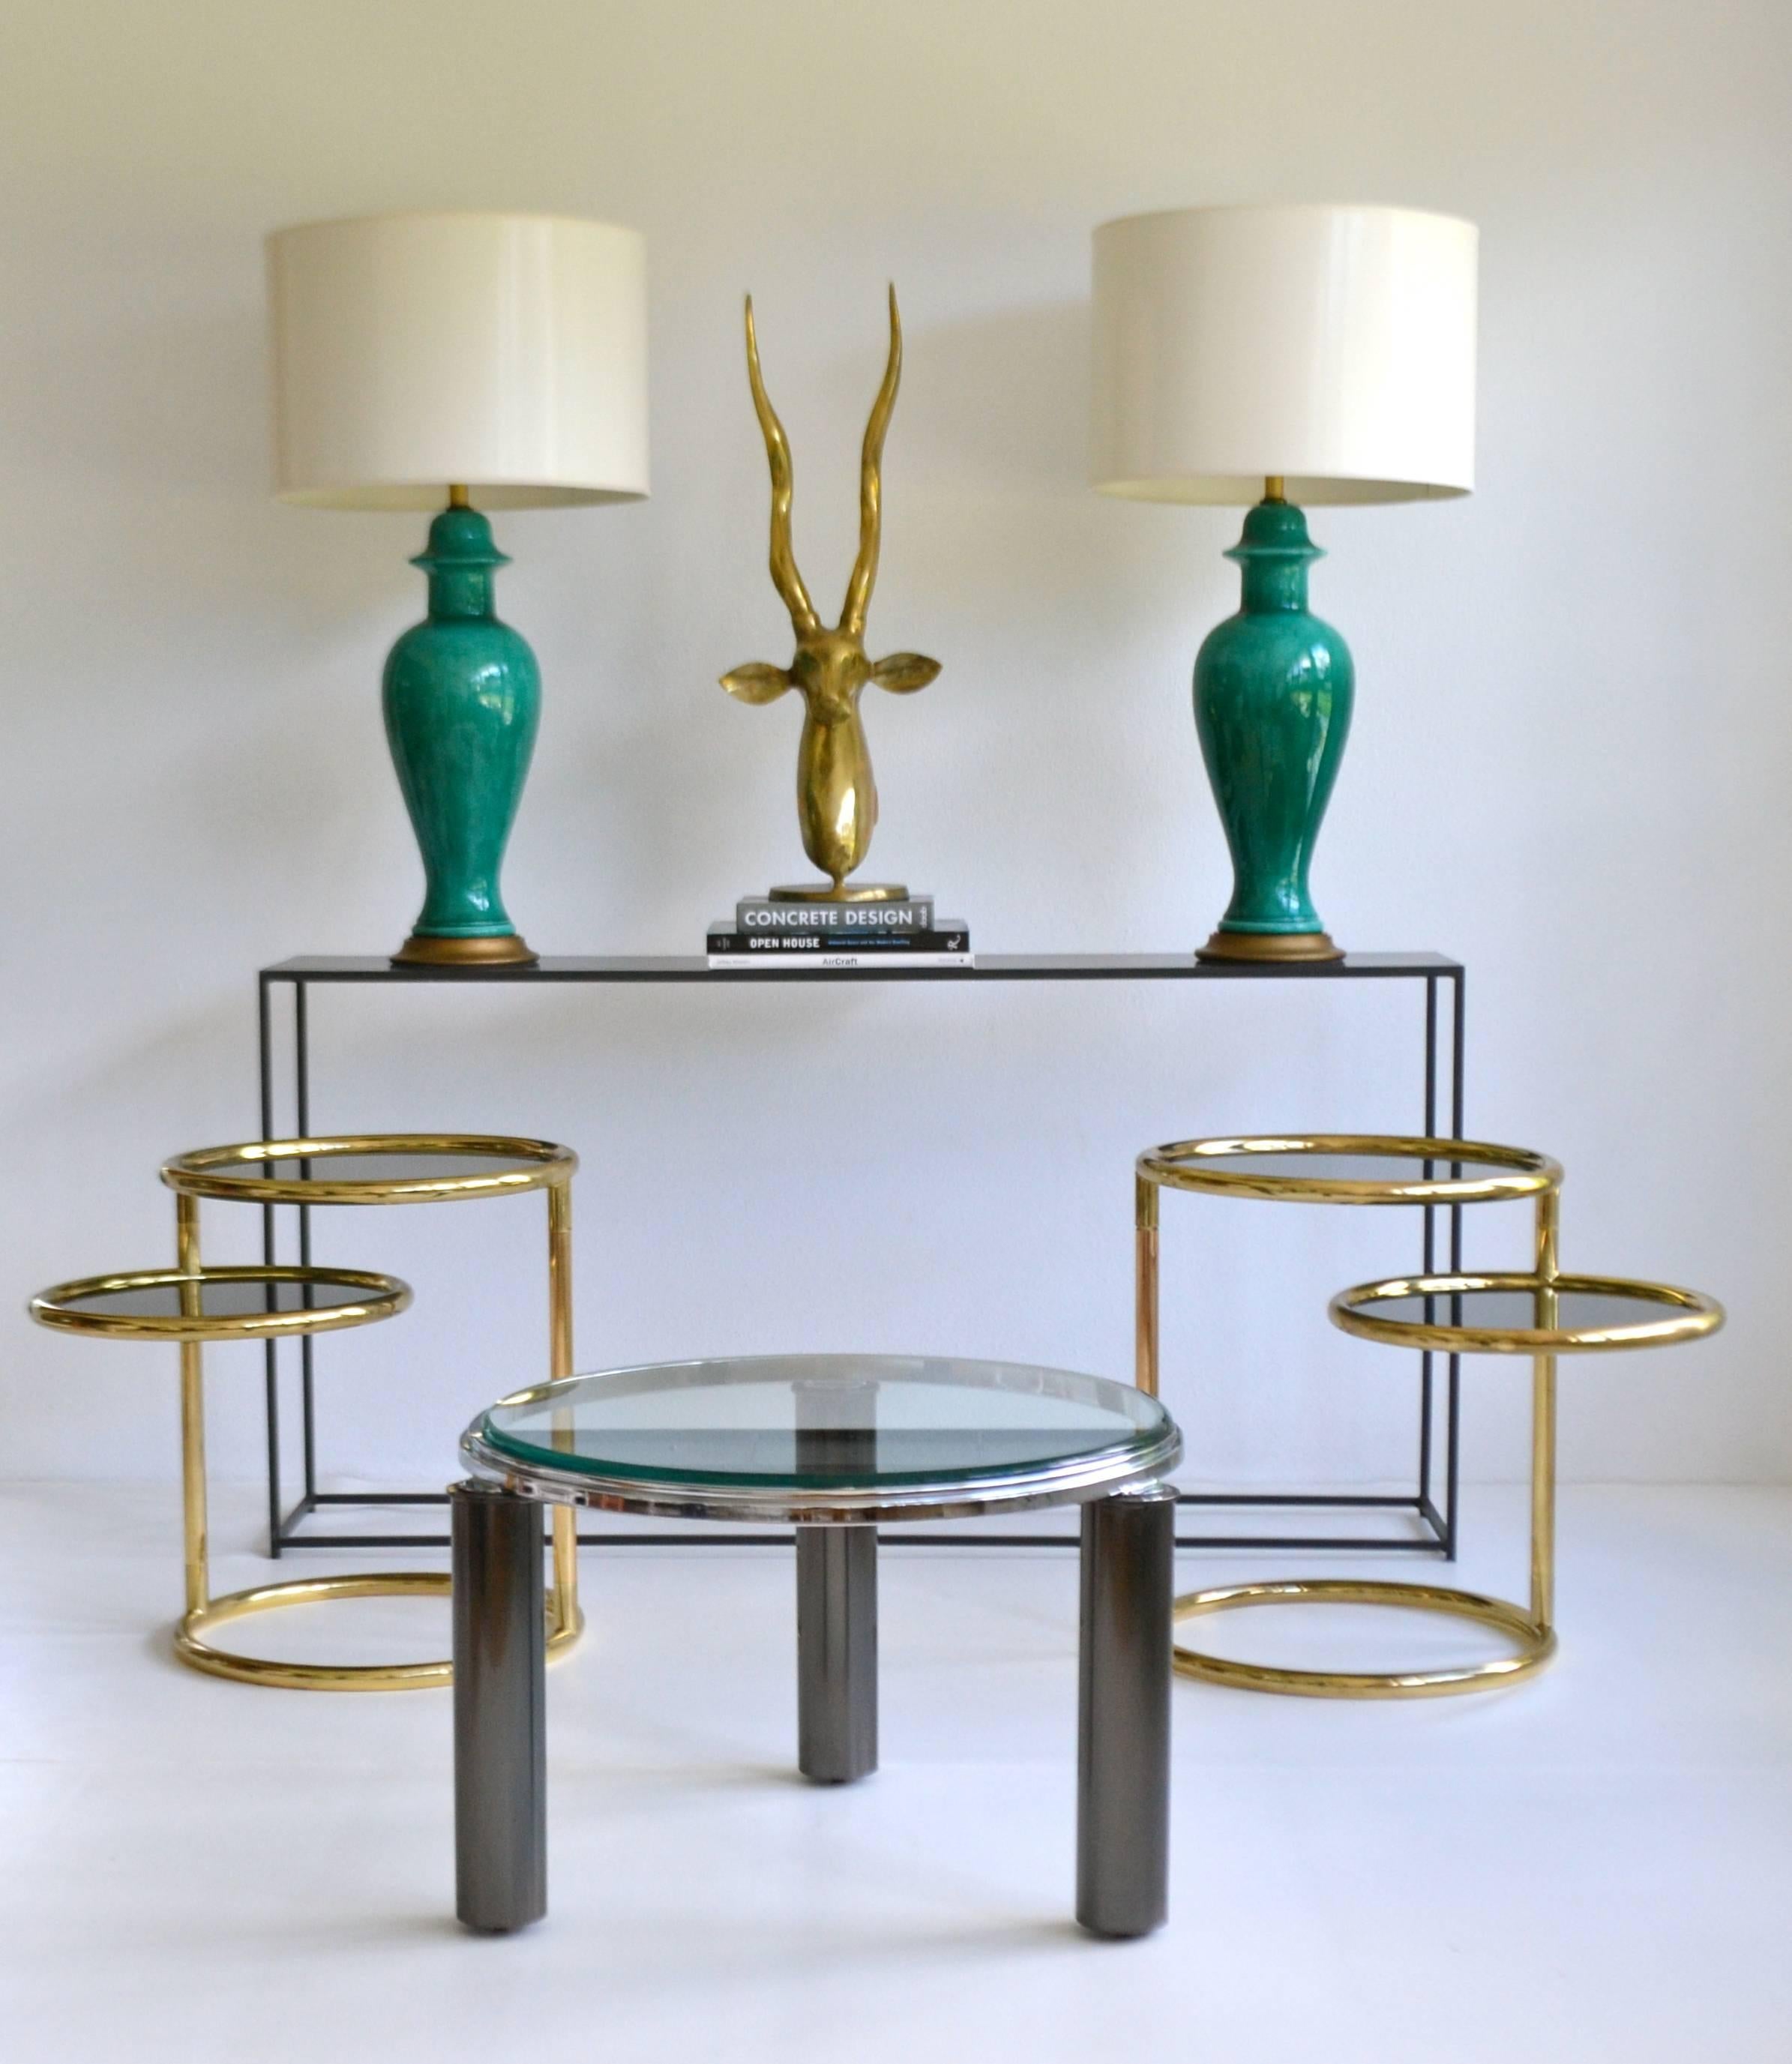 Postmodern architectural gunmetal and chrome side table, circa 1980s. This striking custom crafted round occasional table is designed with three gunmetal tubular legs with recessed hidden casters and accented with a glass top. Attributed to Design